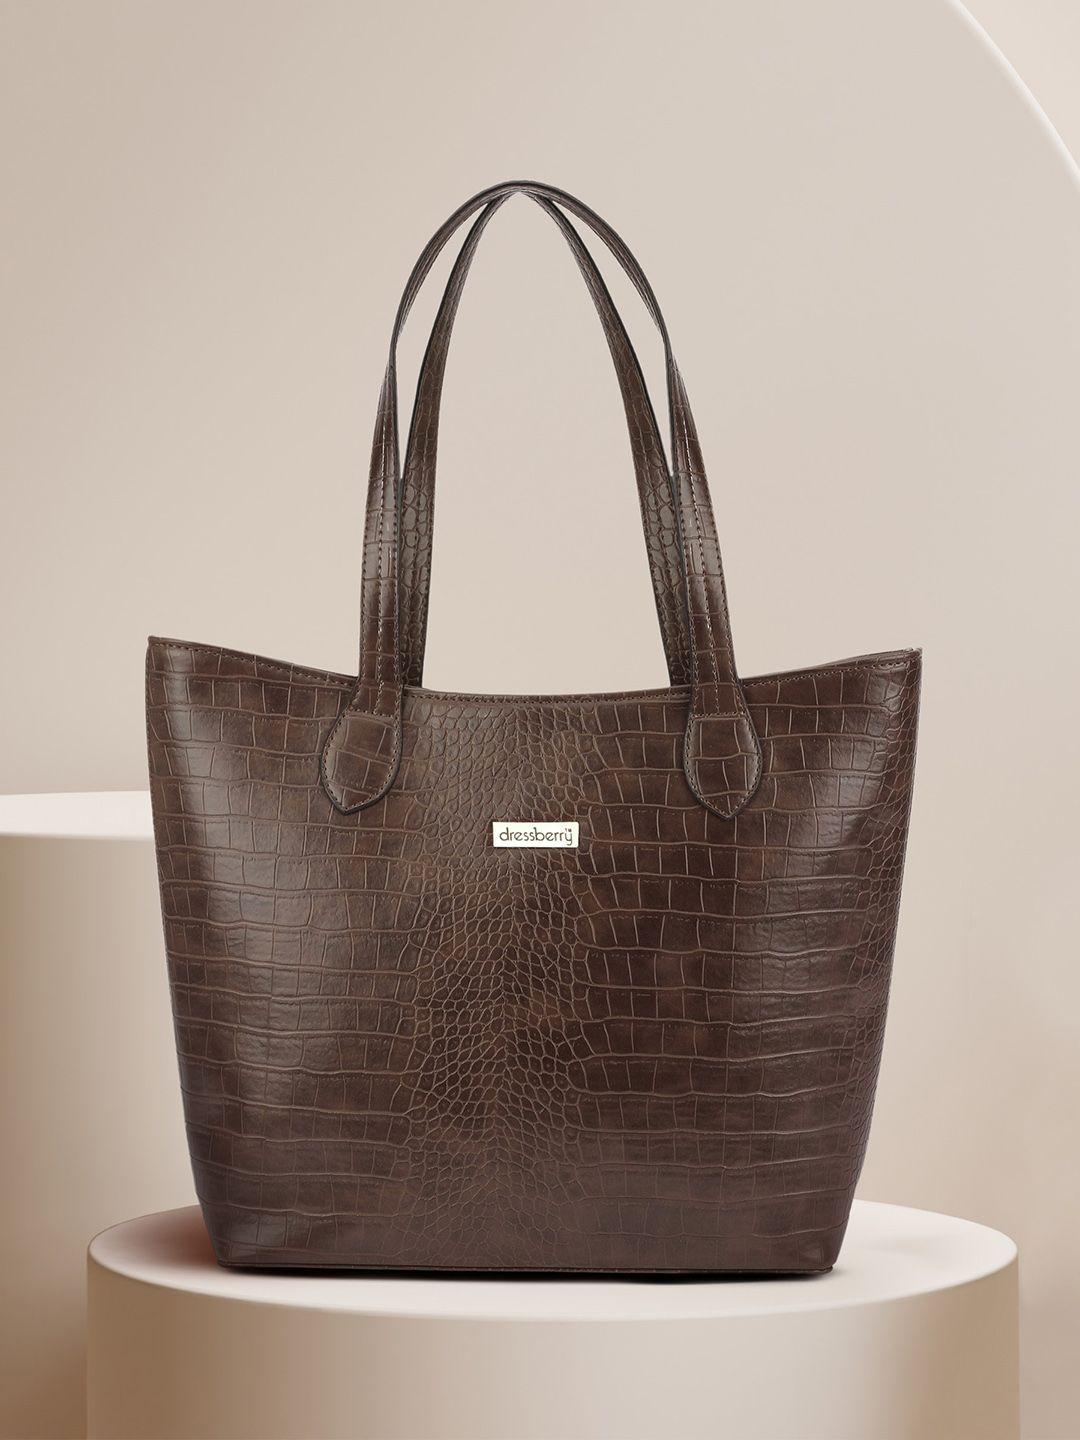 dressberry brown textured structured tote bag